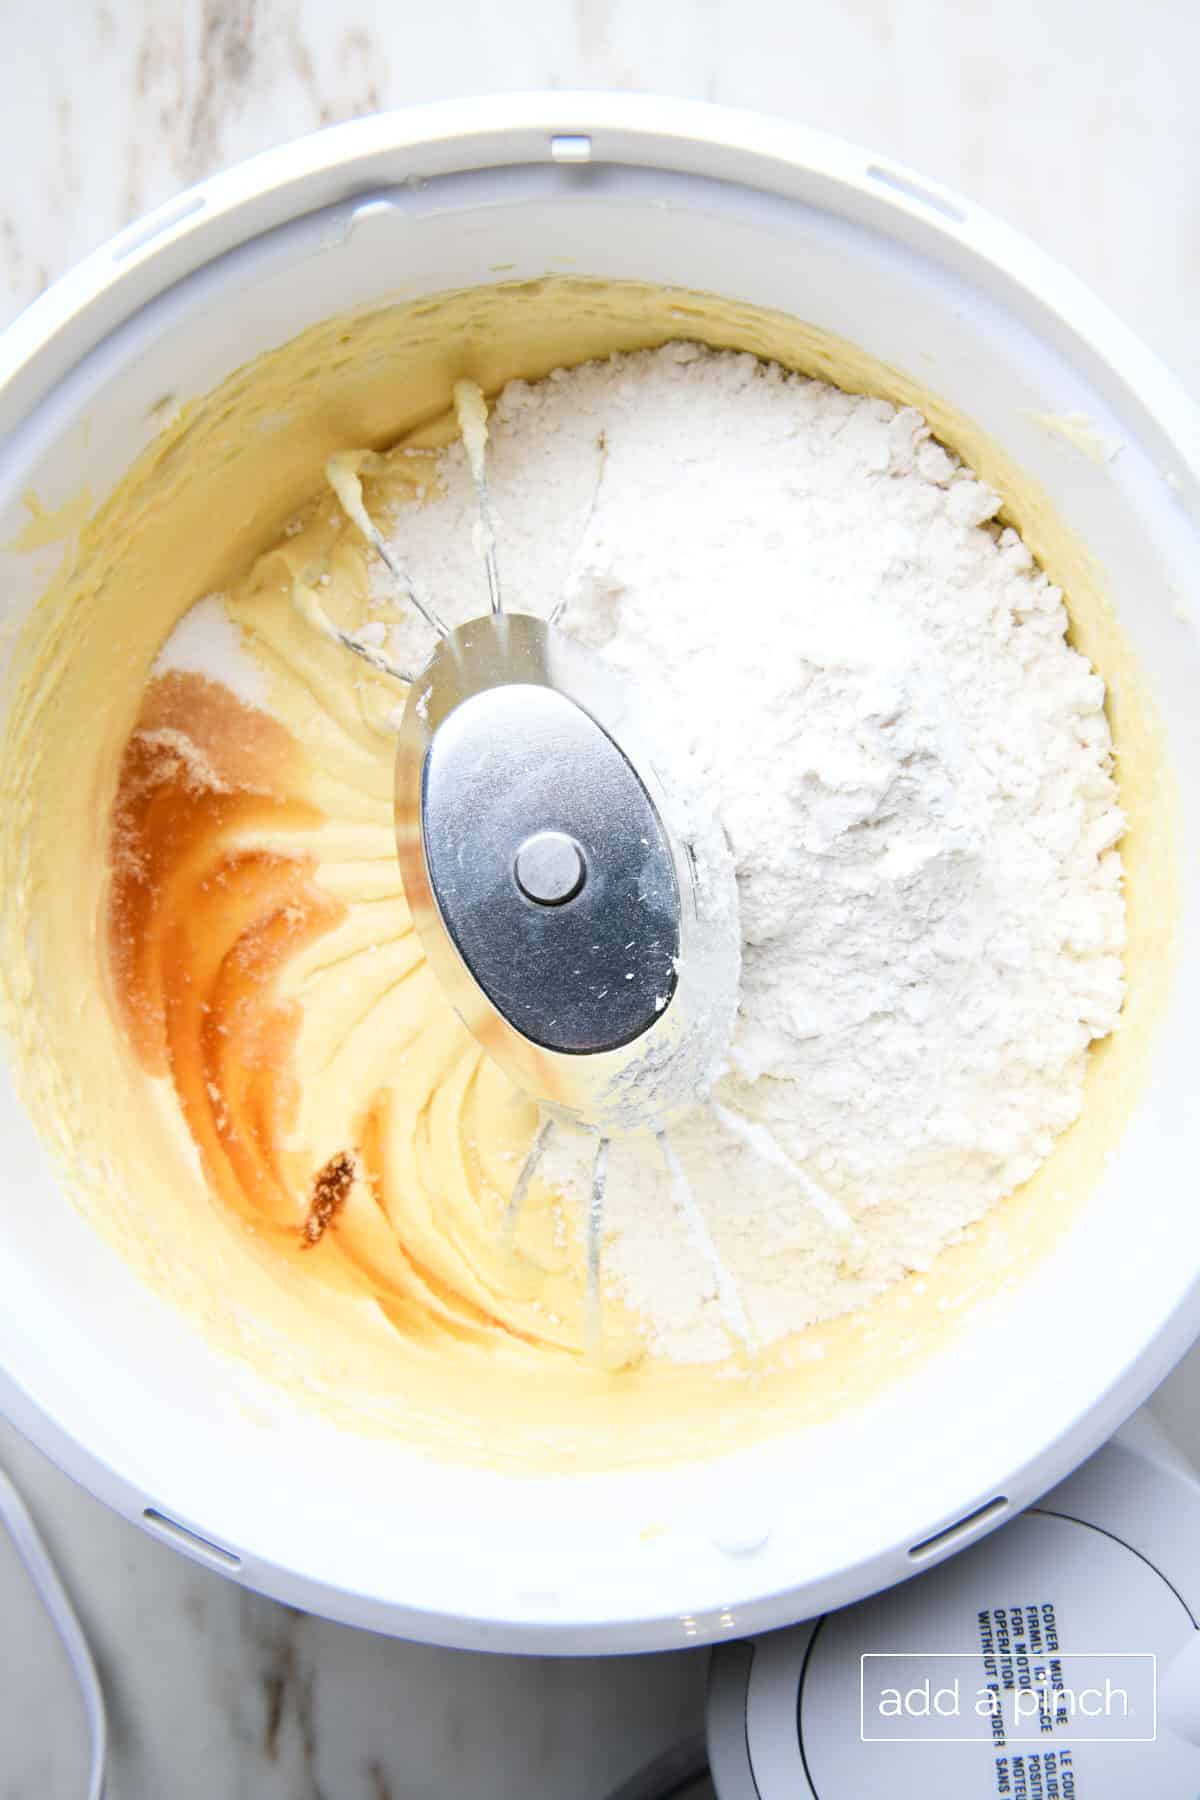 Stand mixer bowl has creamed ingredients with flour and vanilla added ready to mix. 